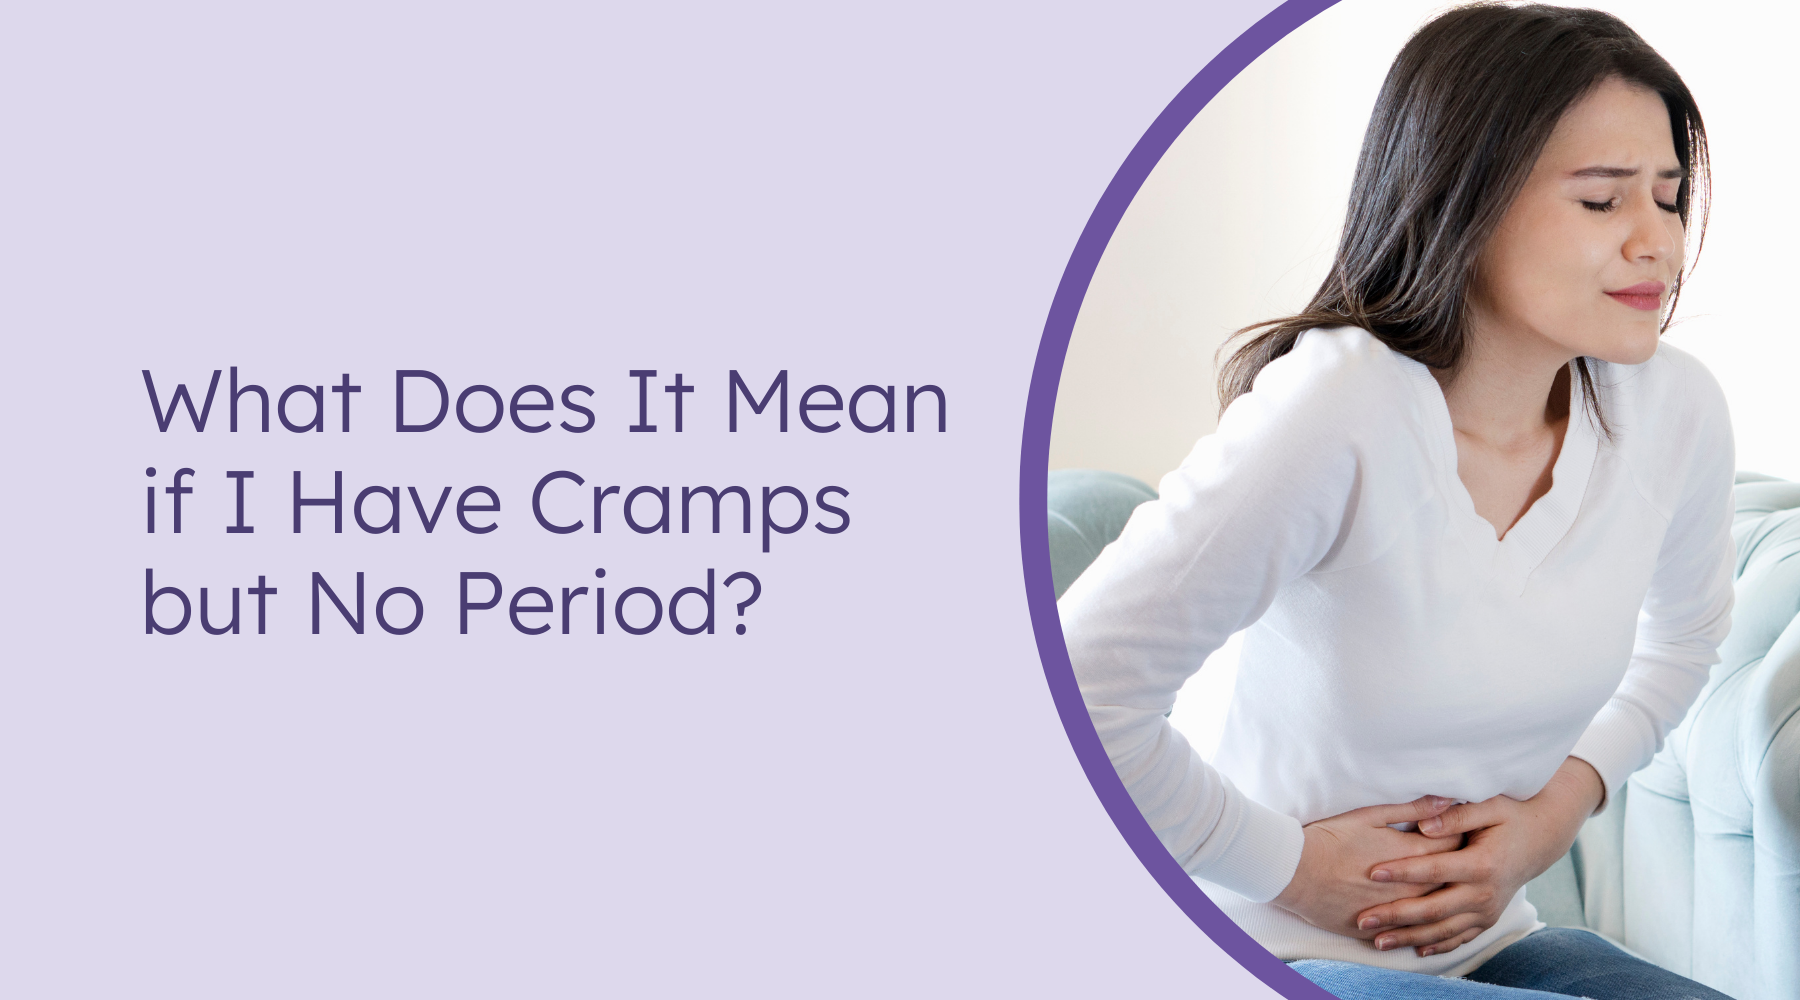 What does it mean if i have cramps but no period